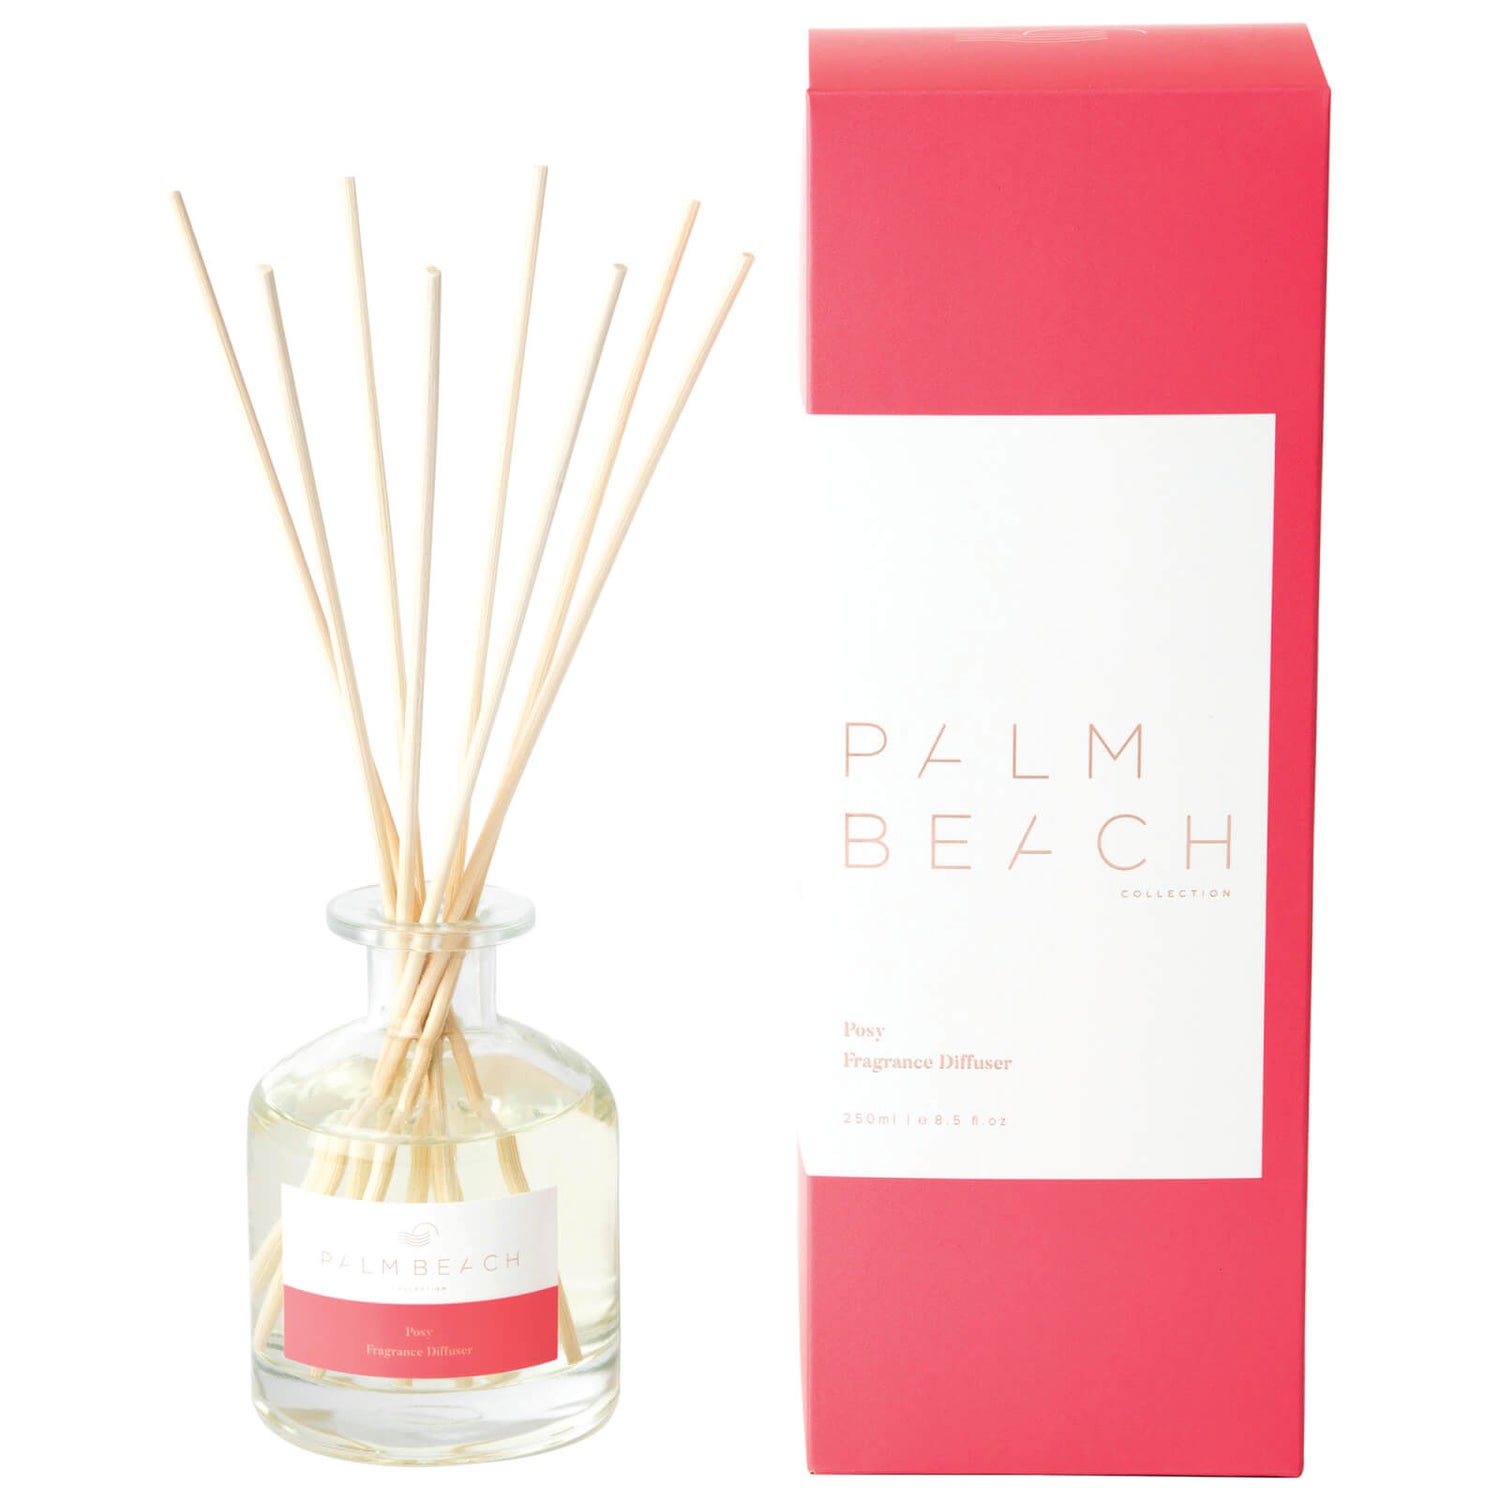 Palm Beach Collection Posy Fragrance Diffuser 250ml